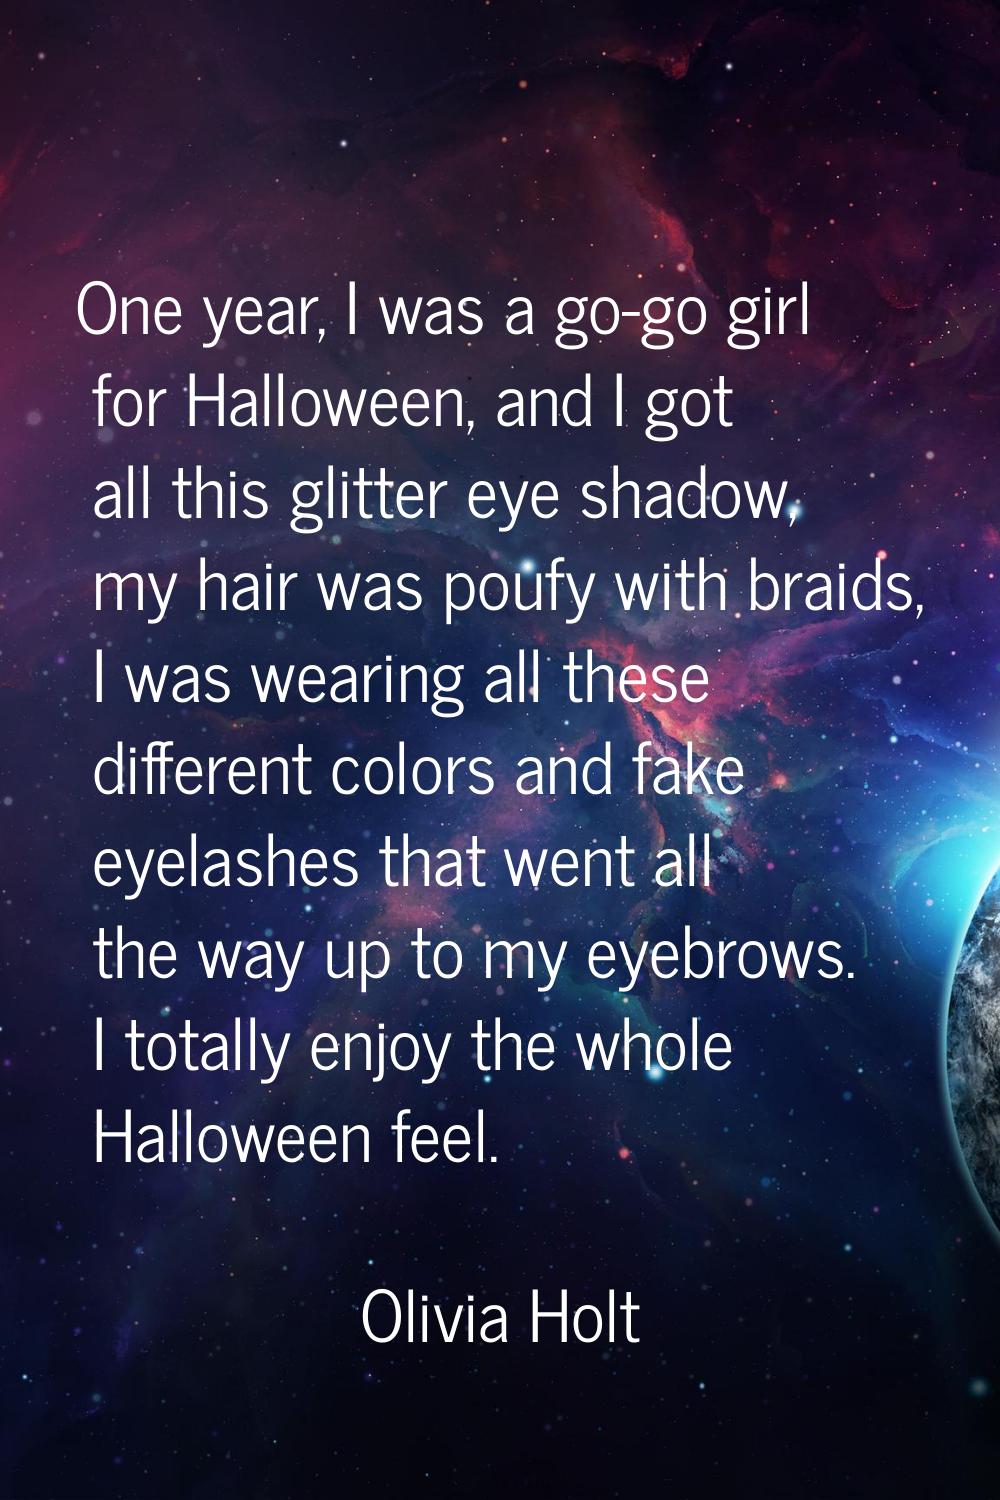 One year, I was a go-go girl for Halloween, and I got all this glitter eye shadow, my hair was pouf